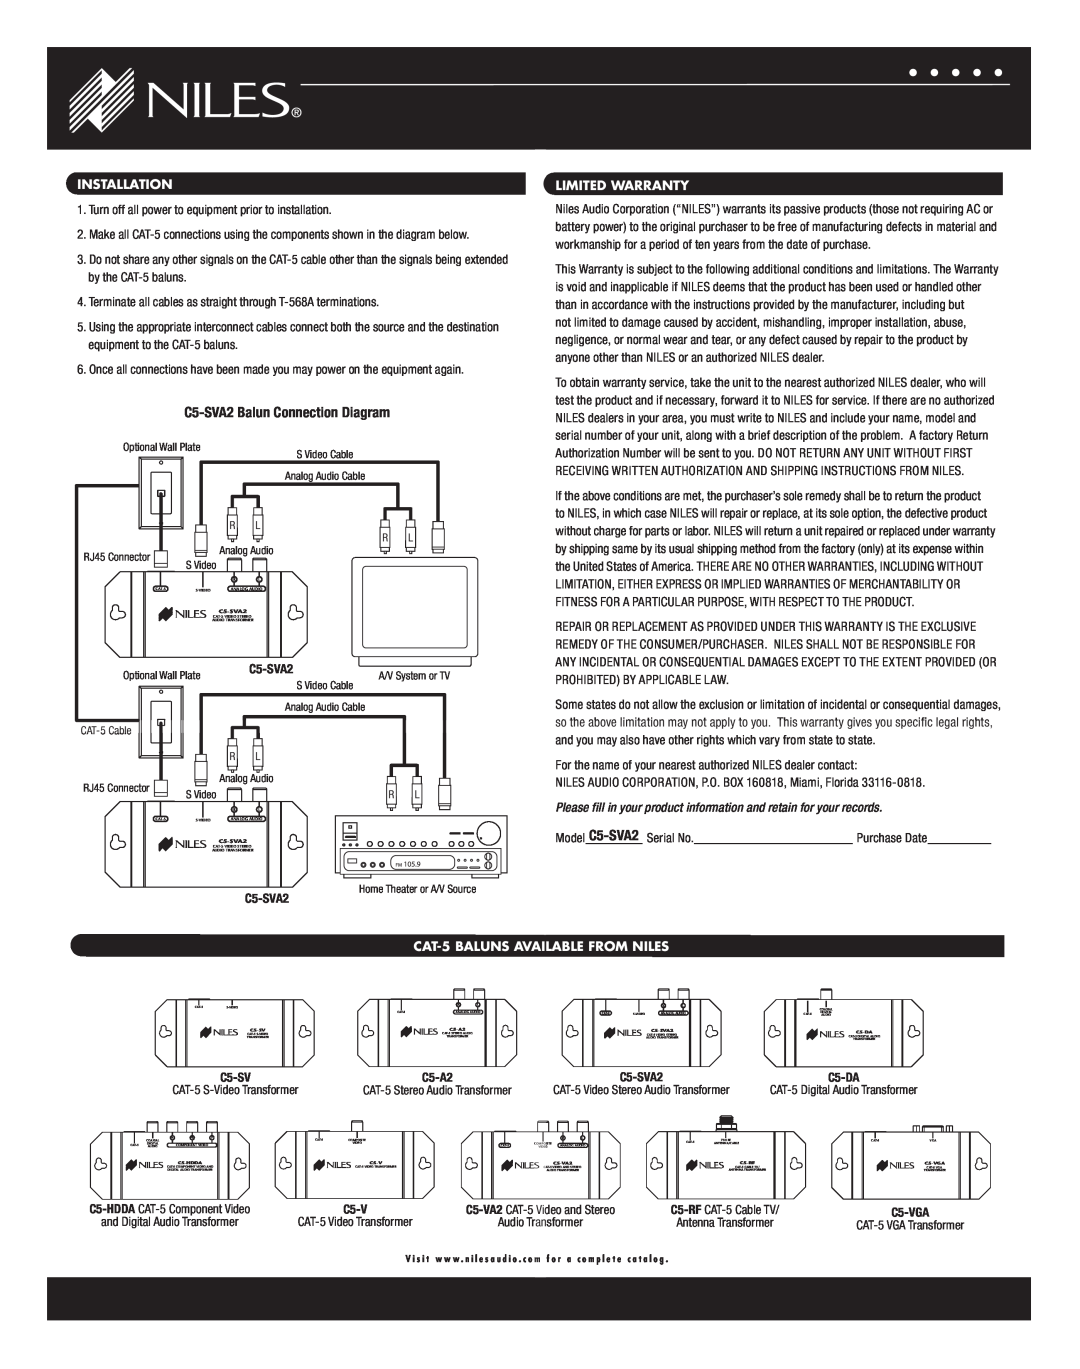 Niles Audio warranty Installation, Limited Warranty, CAT-5BALUNS AVAILABLE FROM NILES, C5-SVA2Balun Connection Diagram 